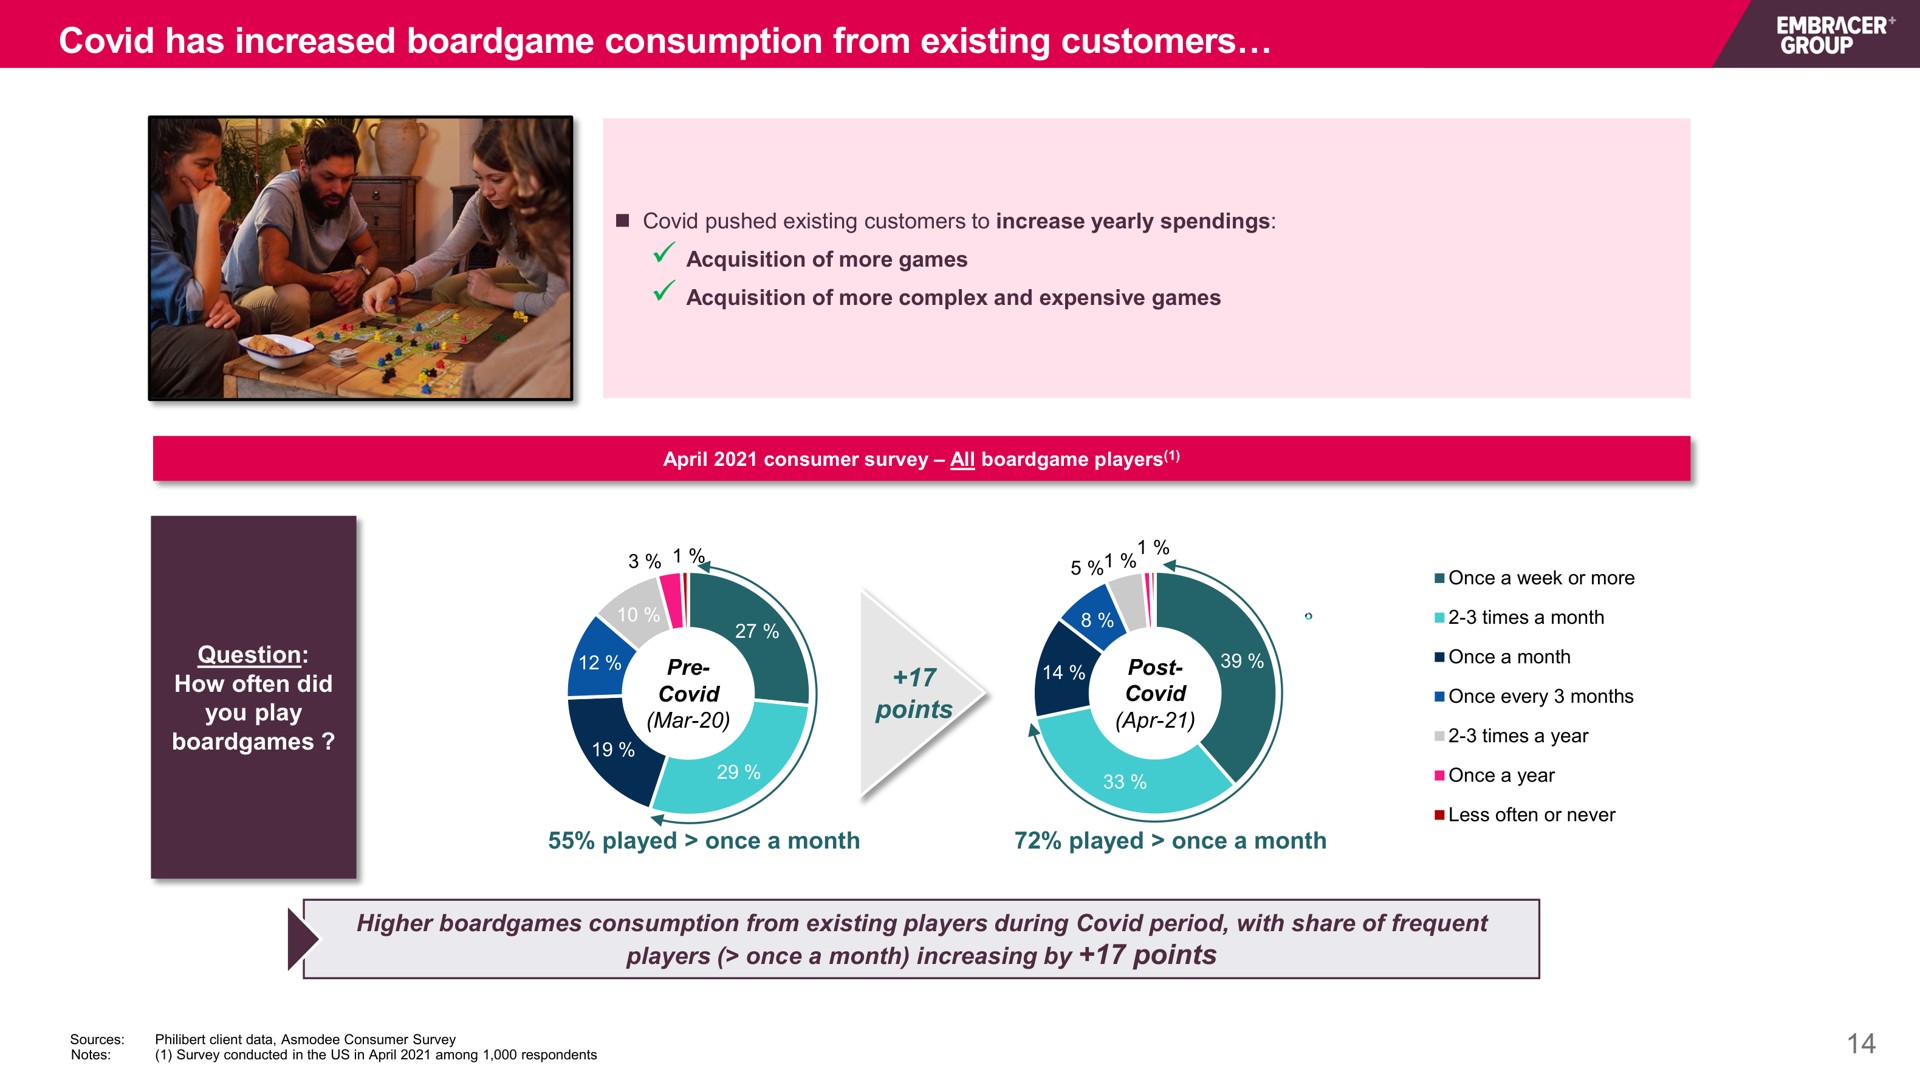 covid has increased consumption from existing customers points mar | Embracer Group